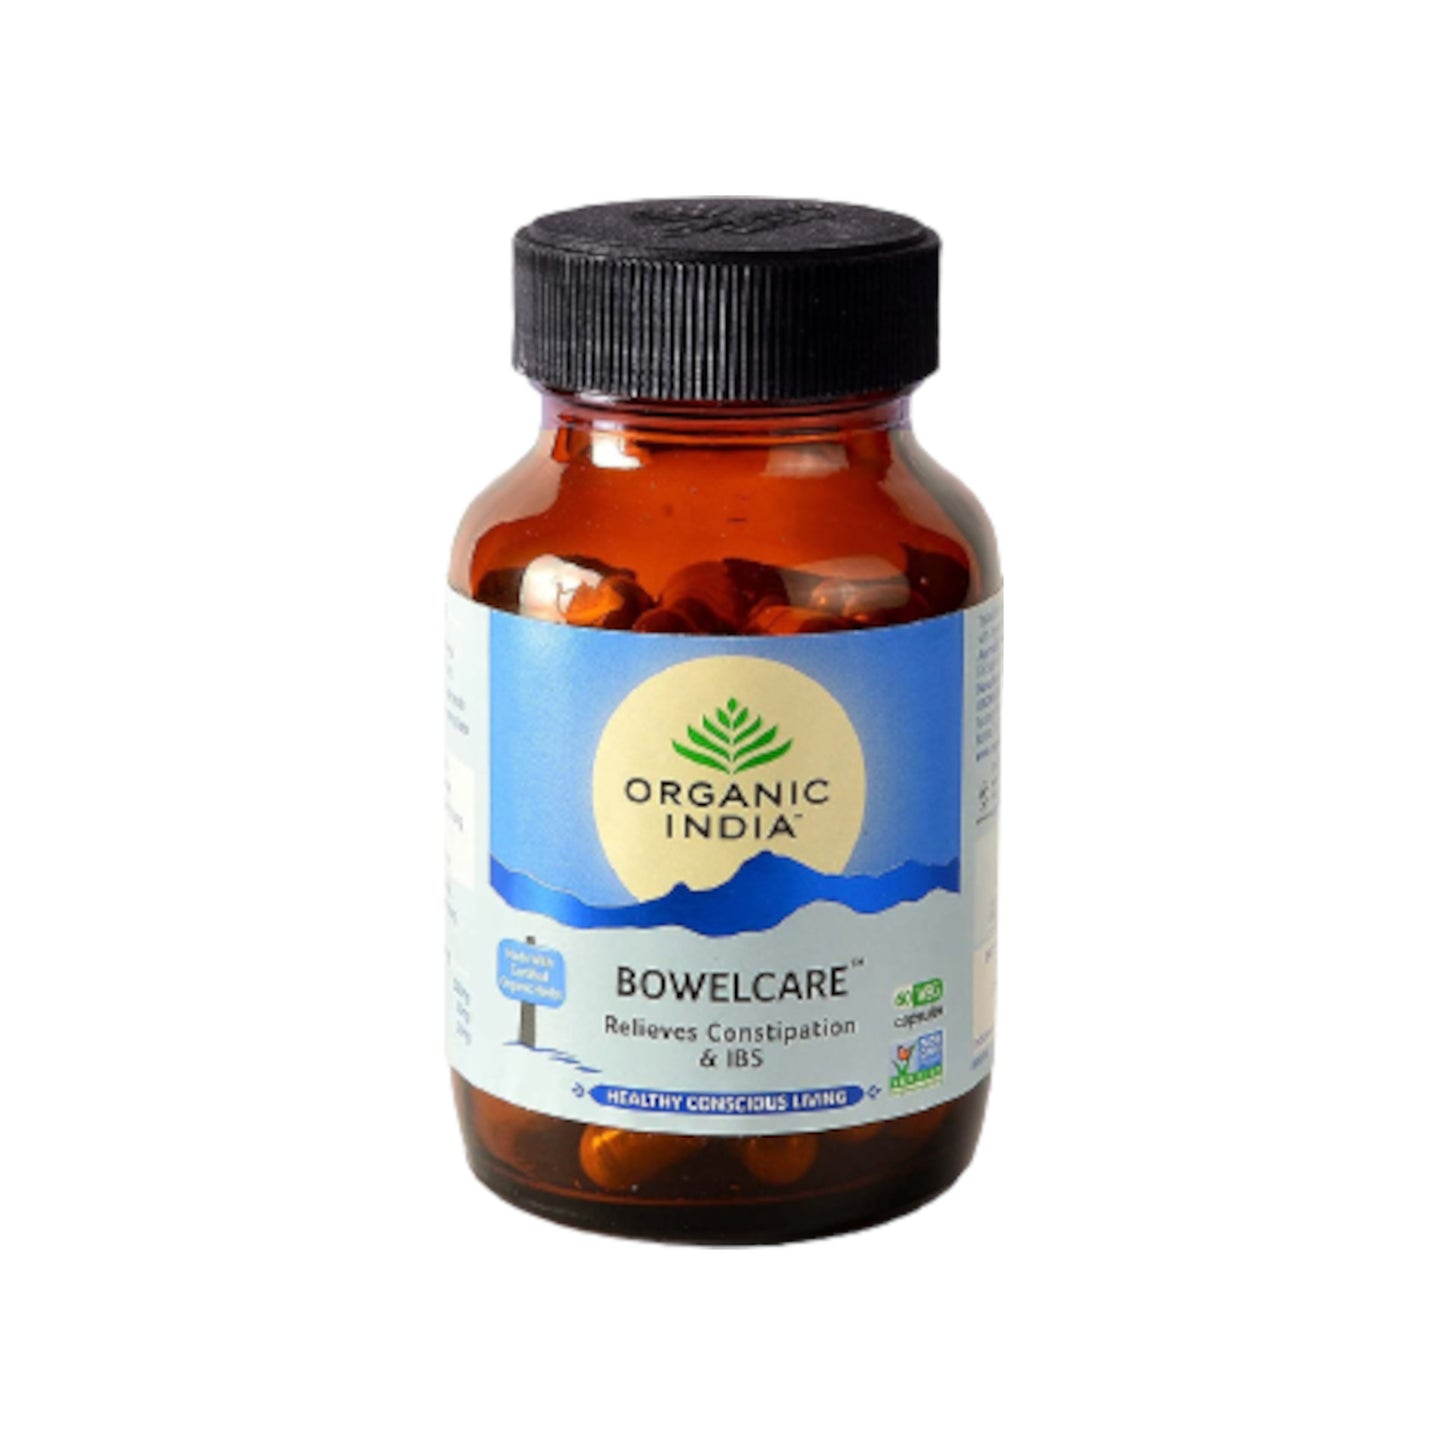 Image: Organic India Bowelcare 60 Capsules - Gentle, Effective Cleansing for Digestive Health.